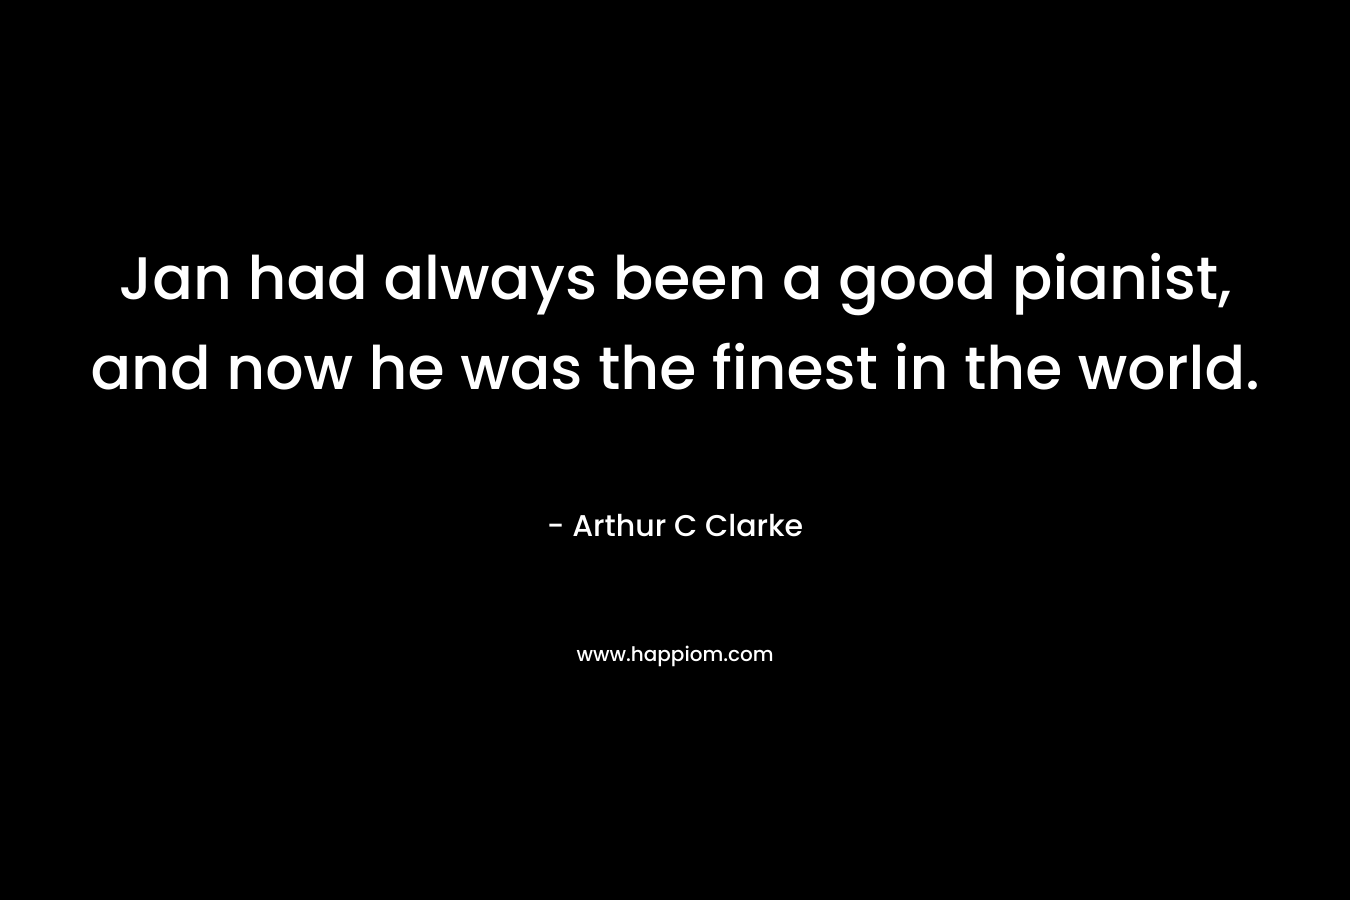 Jan had always been a good pianist, and now he was the finest in the world. – Arthur C Clarke